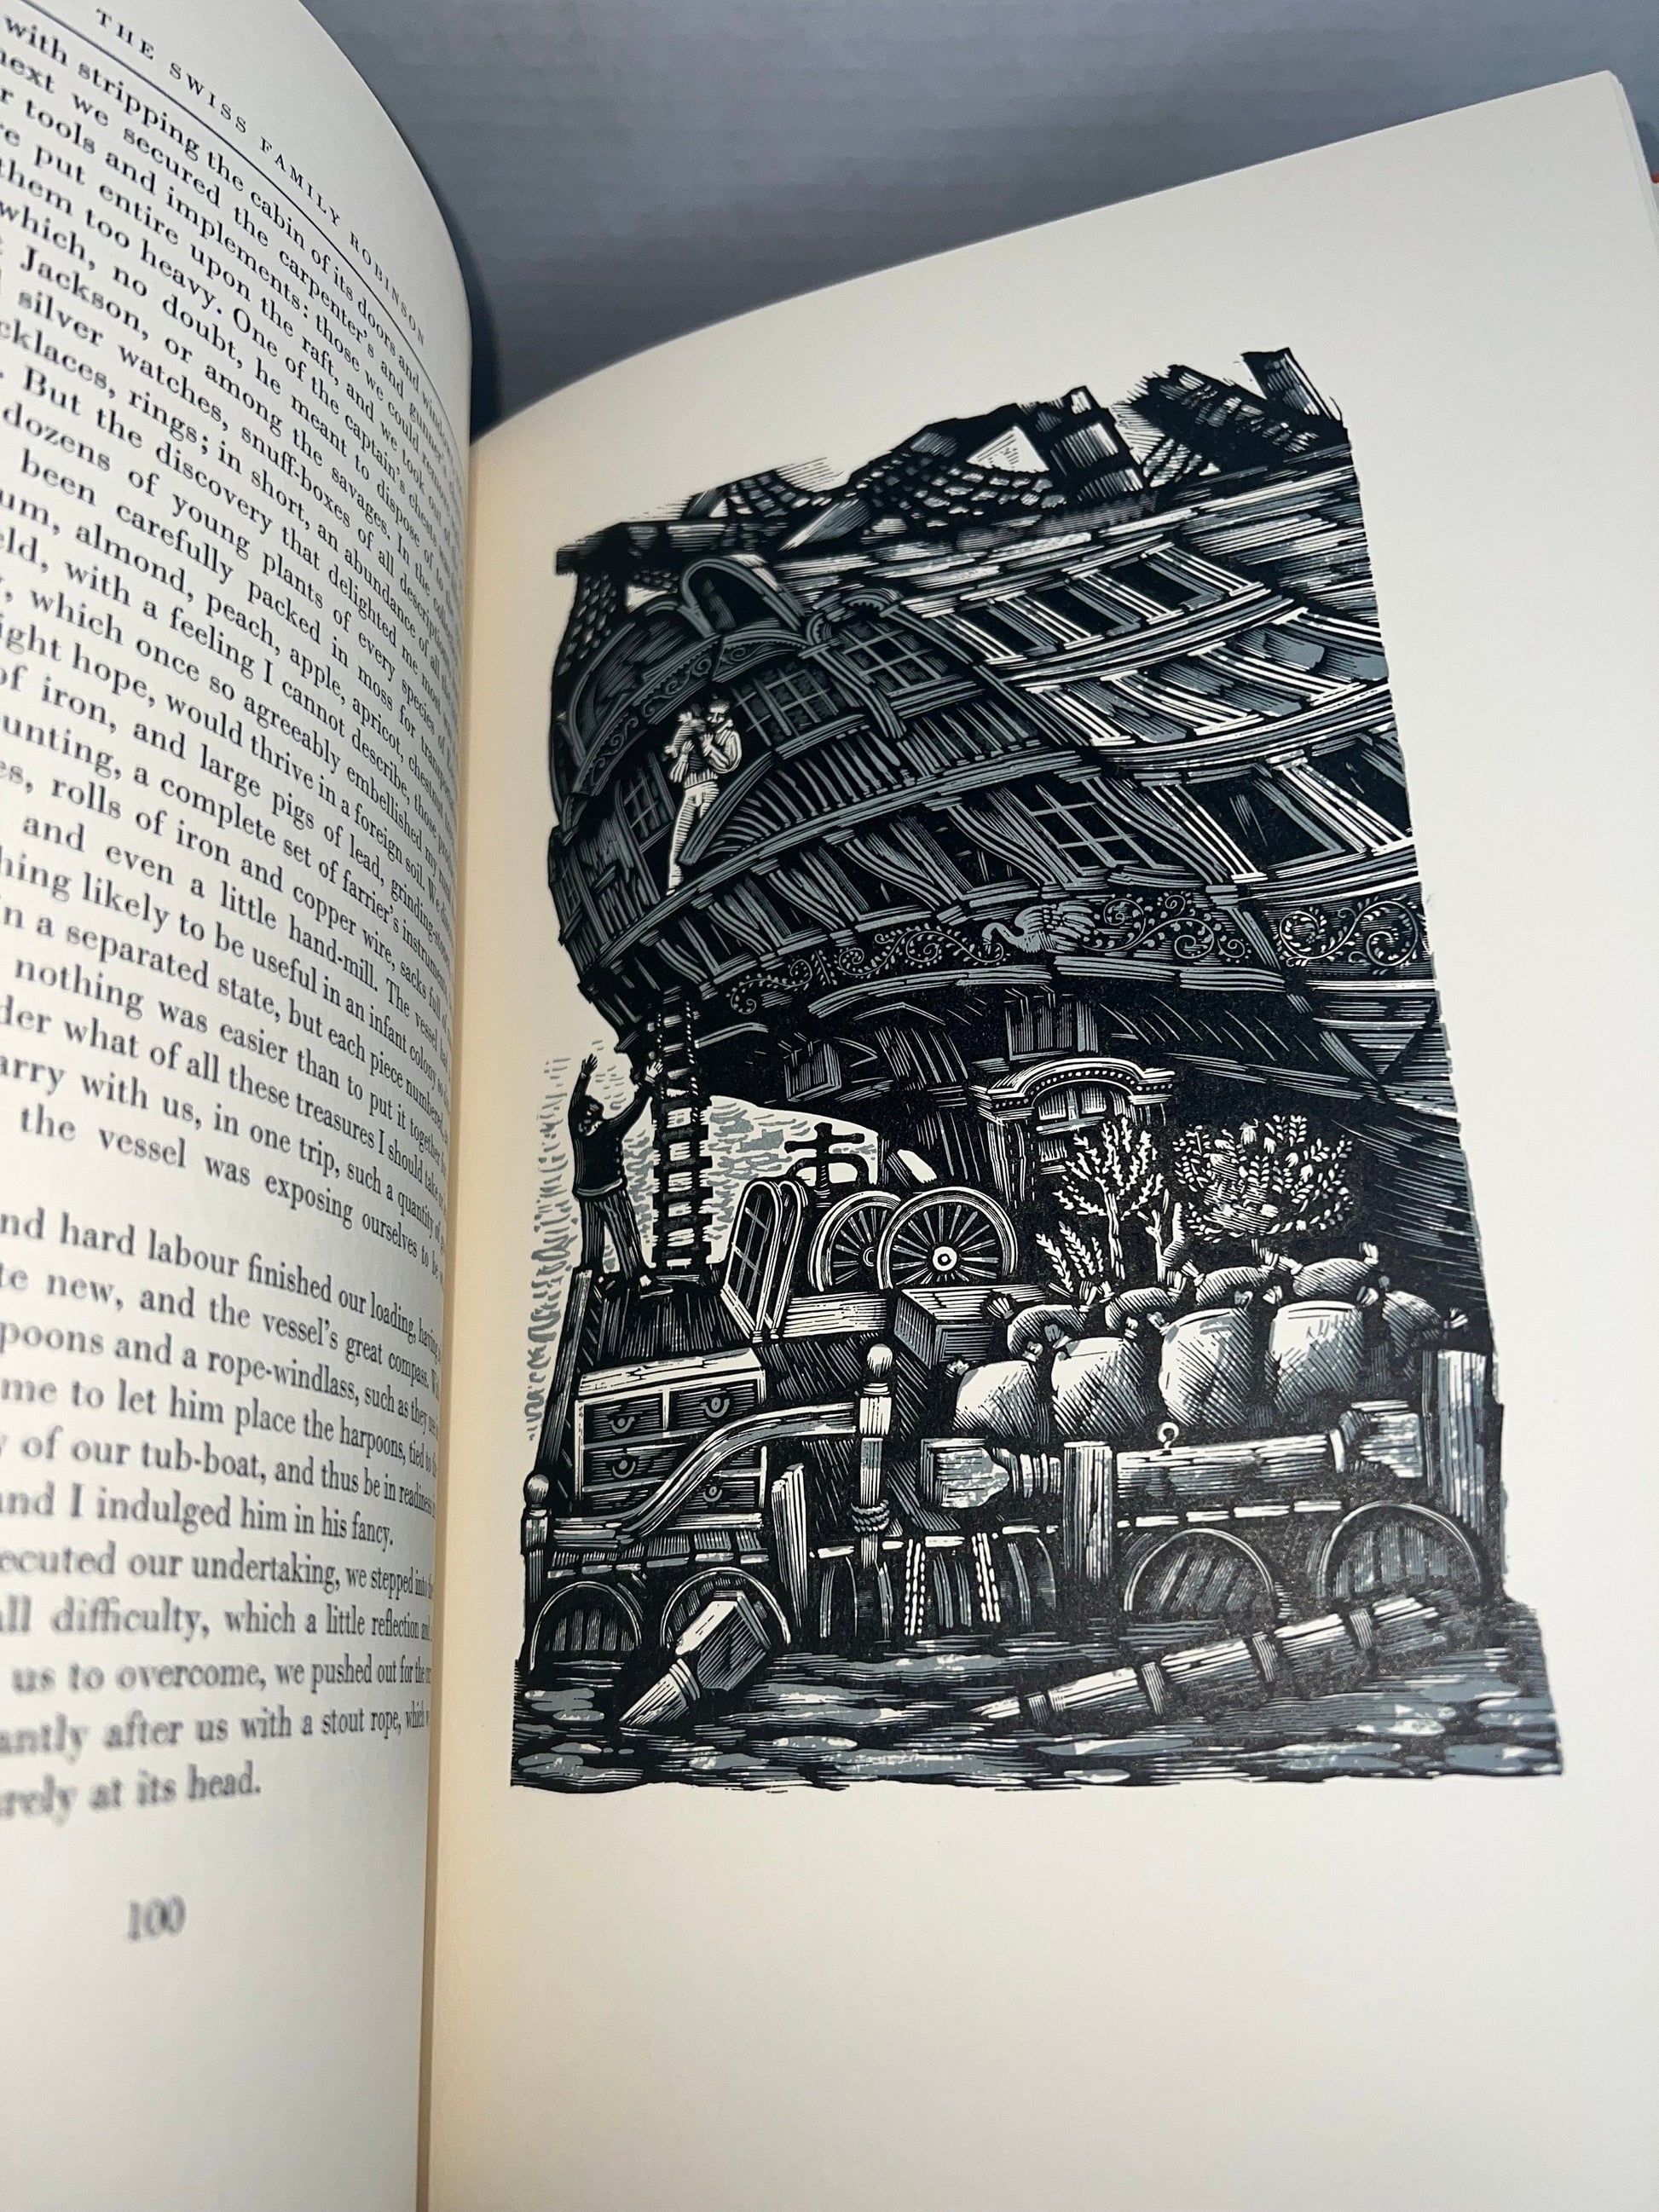 Vintage the Swiss family Robinson 1963 the limited editions club johann wyss illustrated engravings